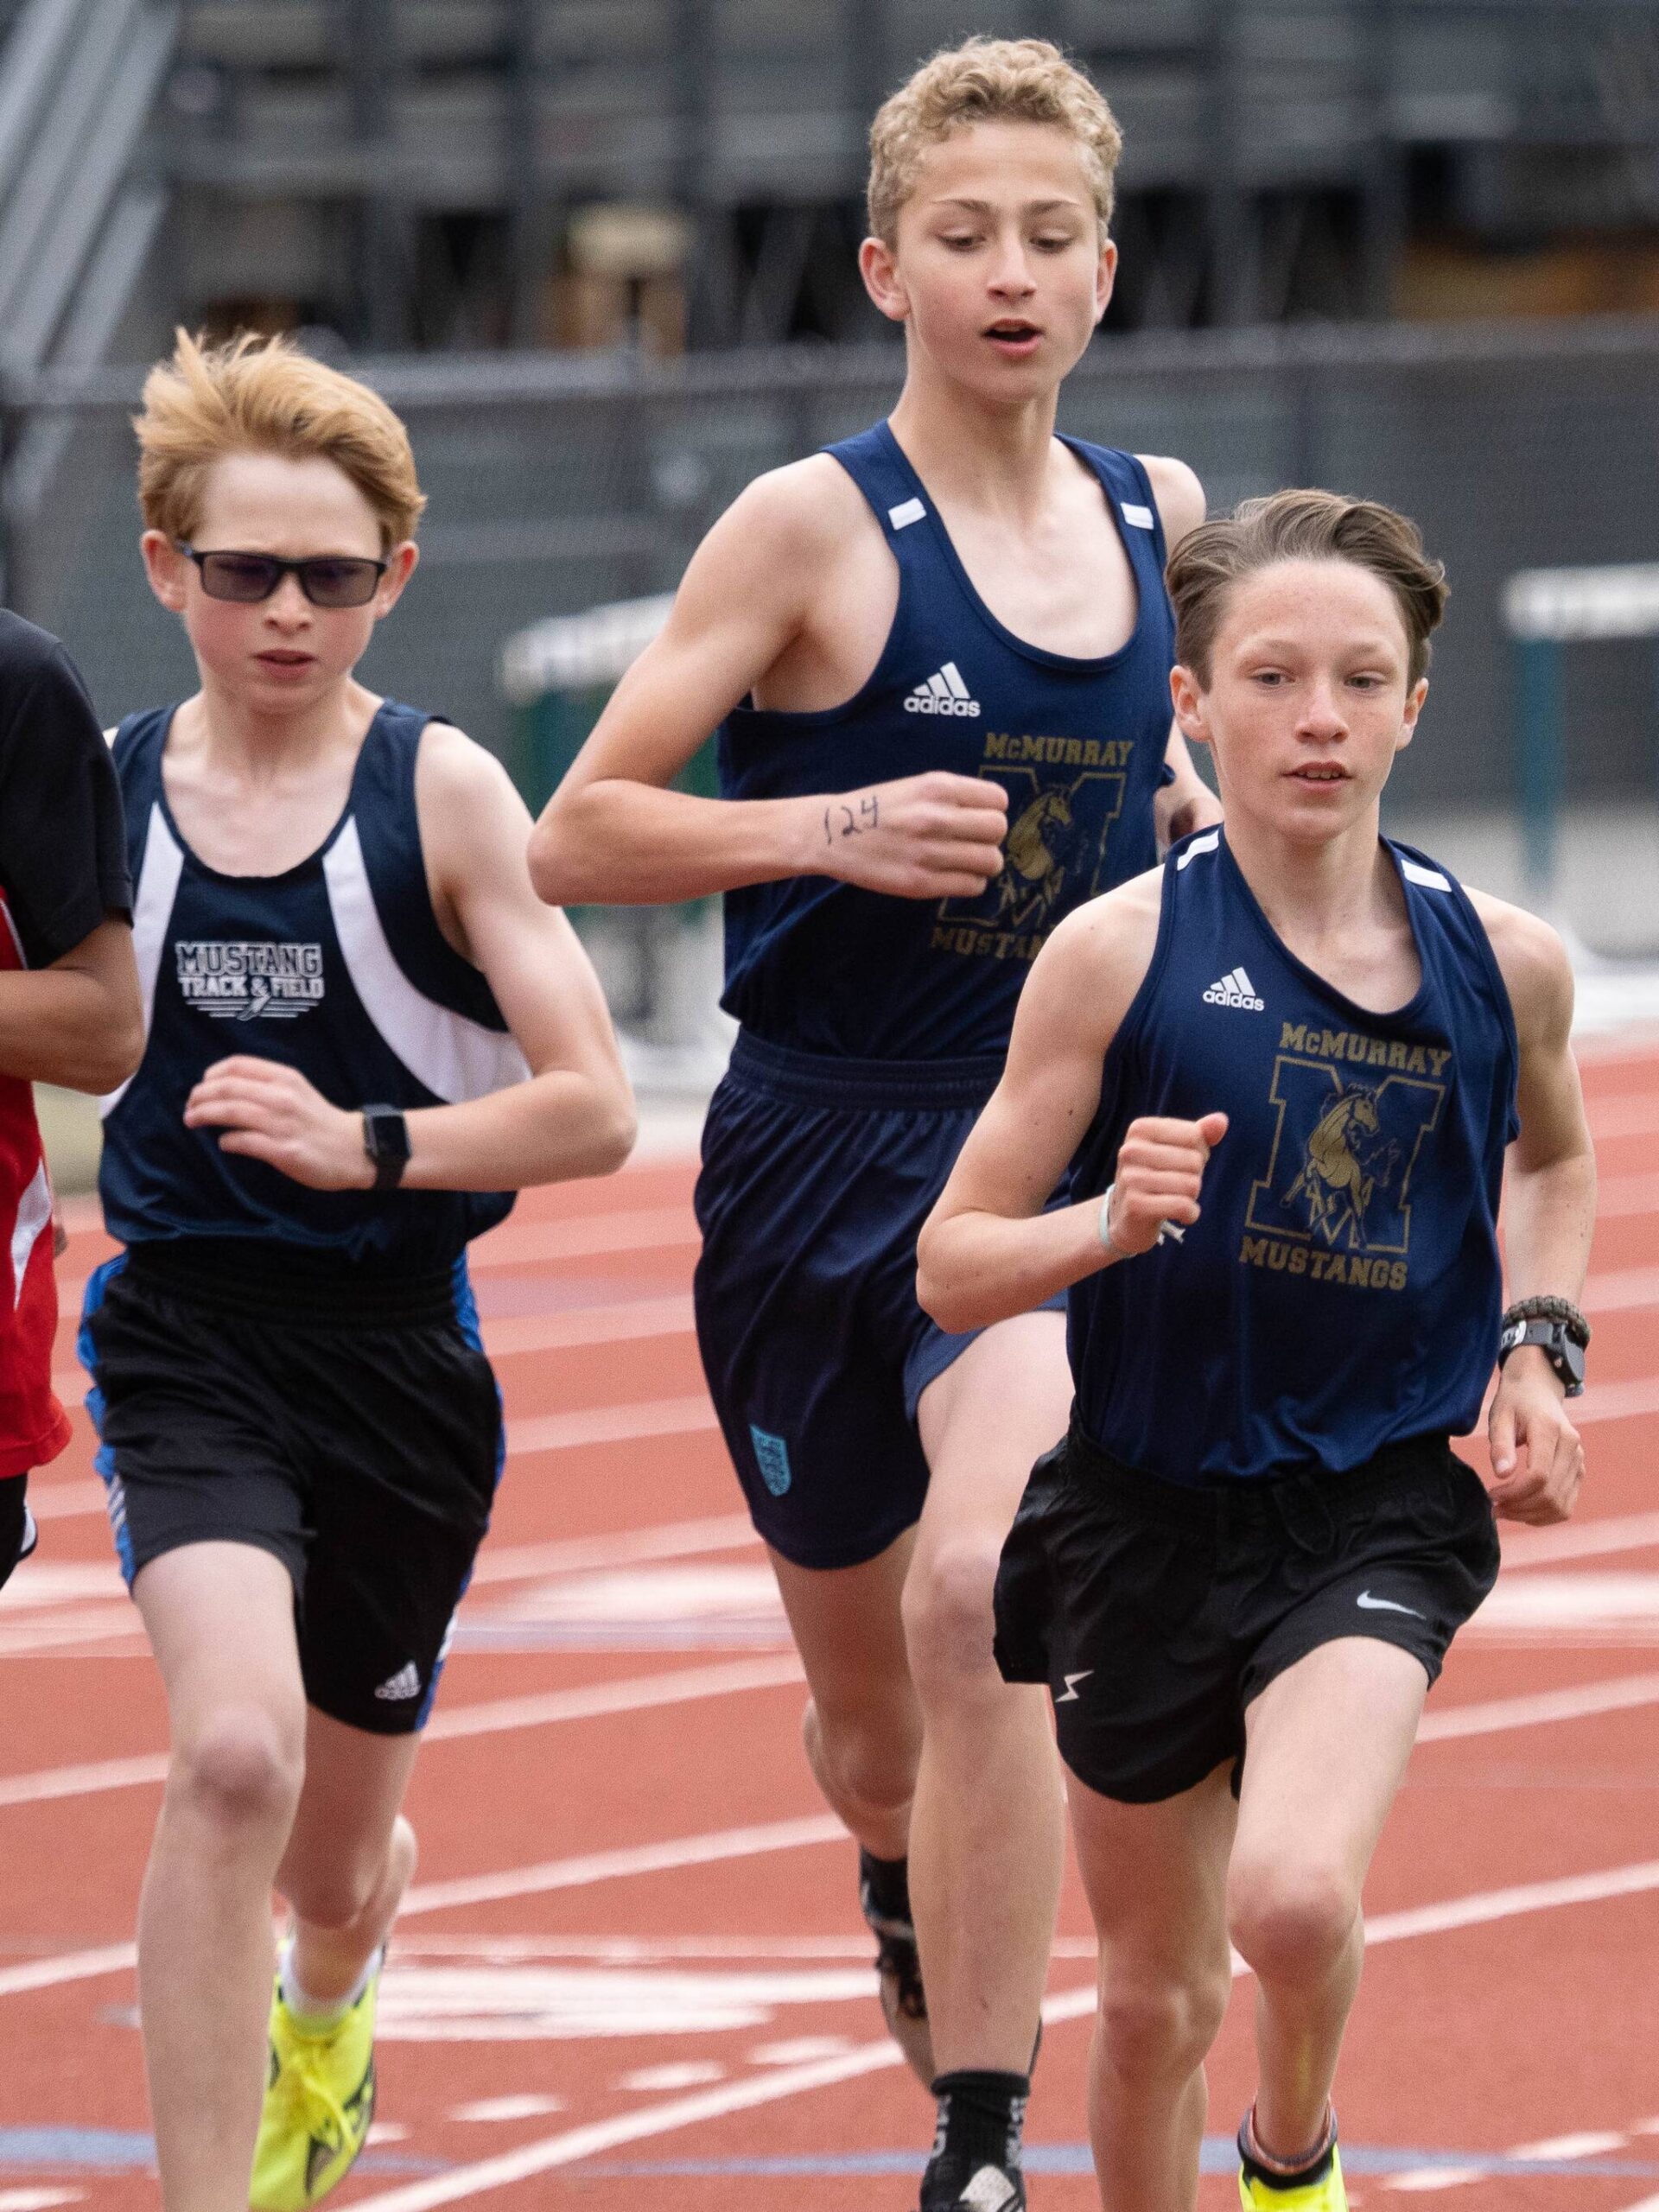 From left to right, Max McLaughlan (third place), Leif McBennett (second place) and Harrison Decker (first place) at the start of the 1600-meter race (John Decker Photo).